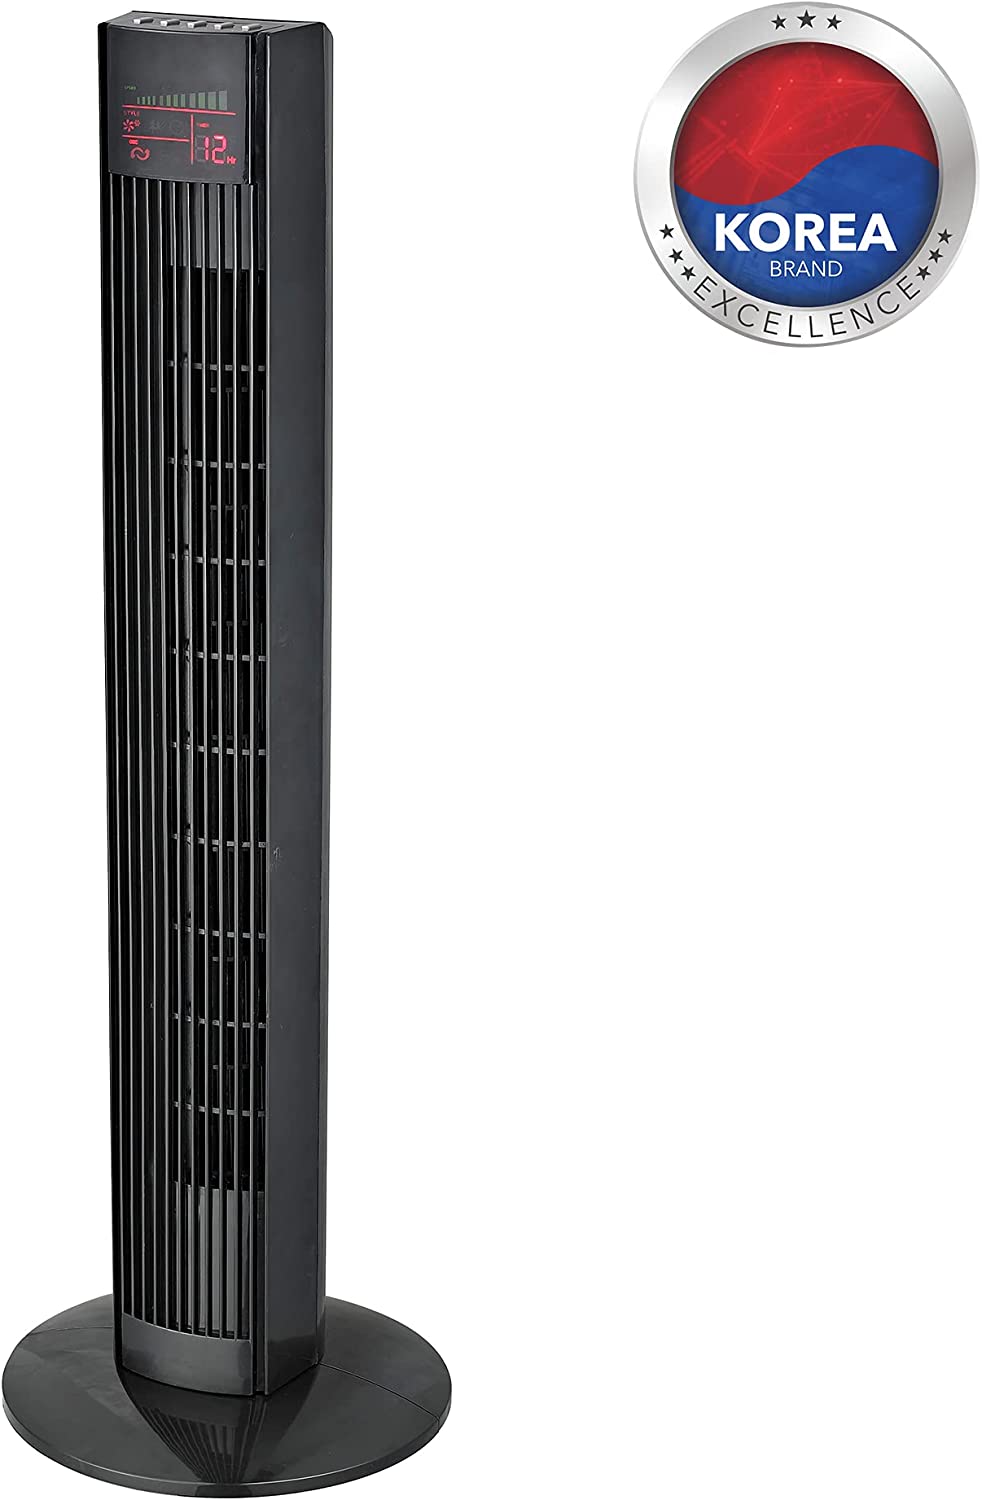 Brown Box 36 inch Digital Tower Fan with Remote, Timer, Oscillation, 3 Fan Speeds & 3 Wind Modes